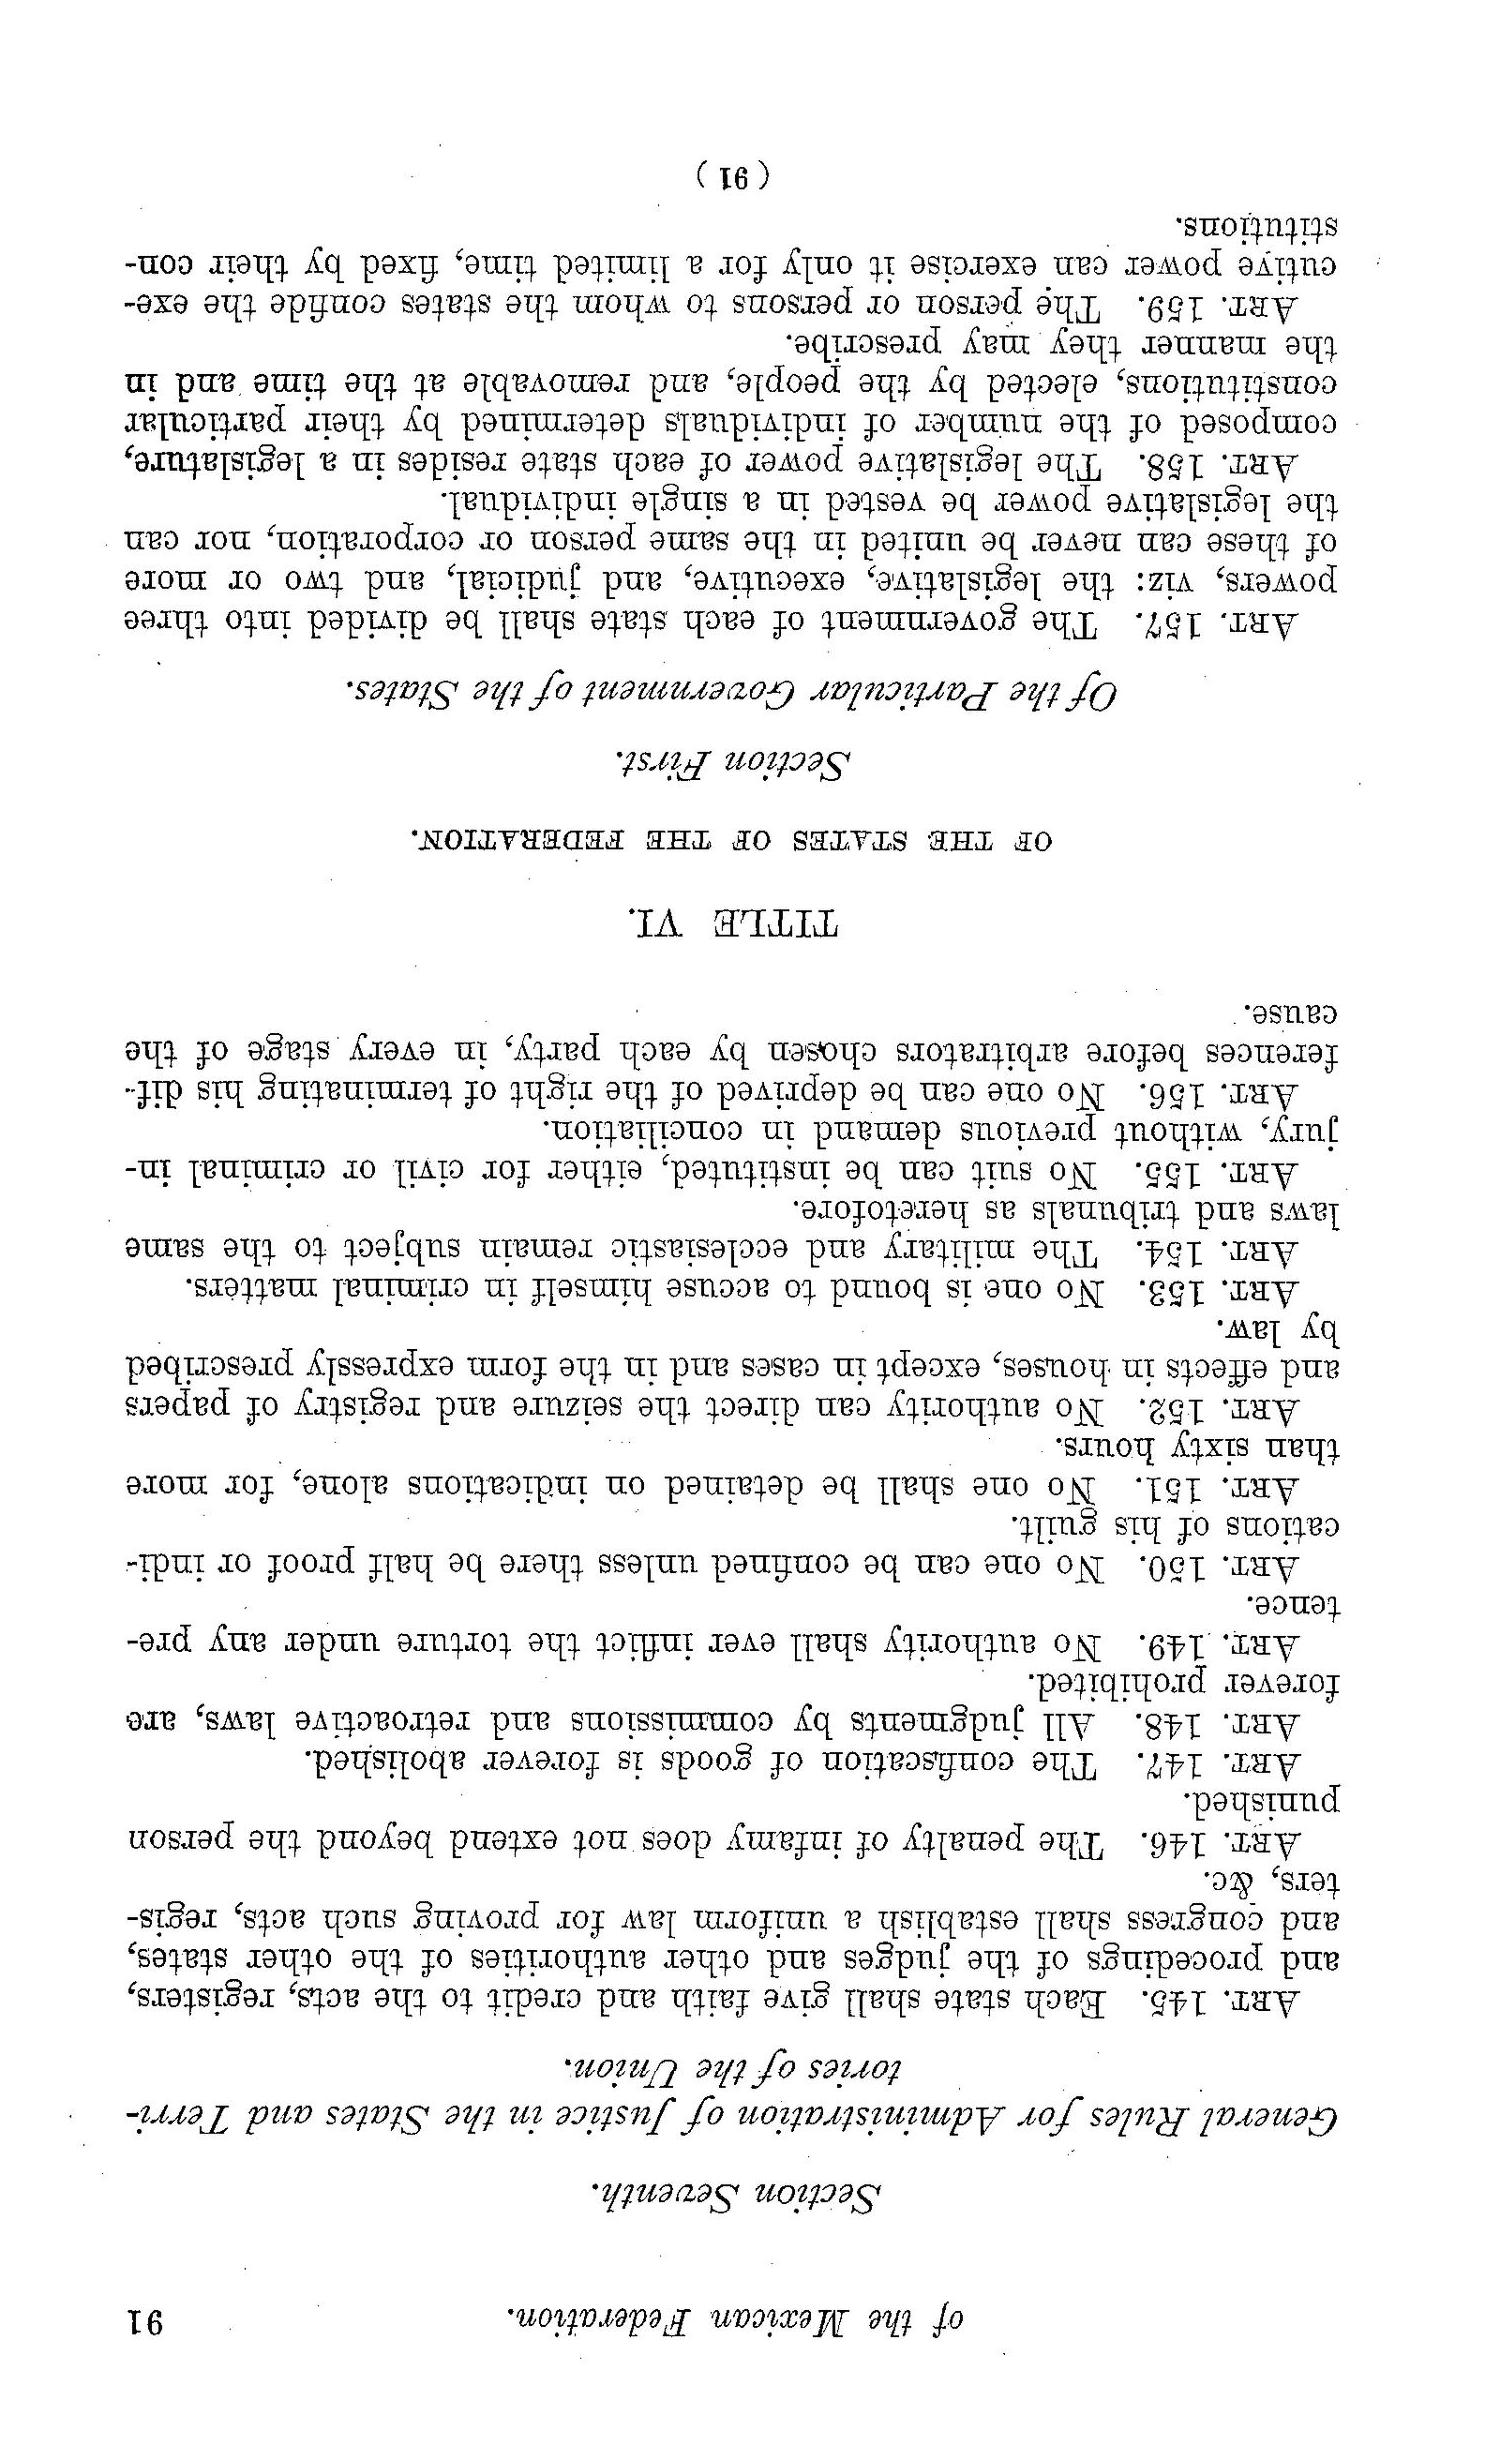 The Laws of Texas, 1822-1897 Volume 1
                                                
                                                    91
                                                